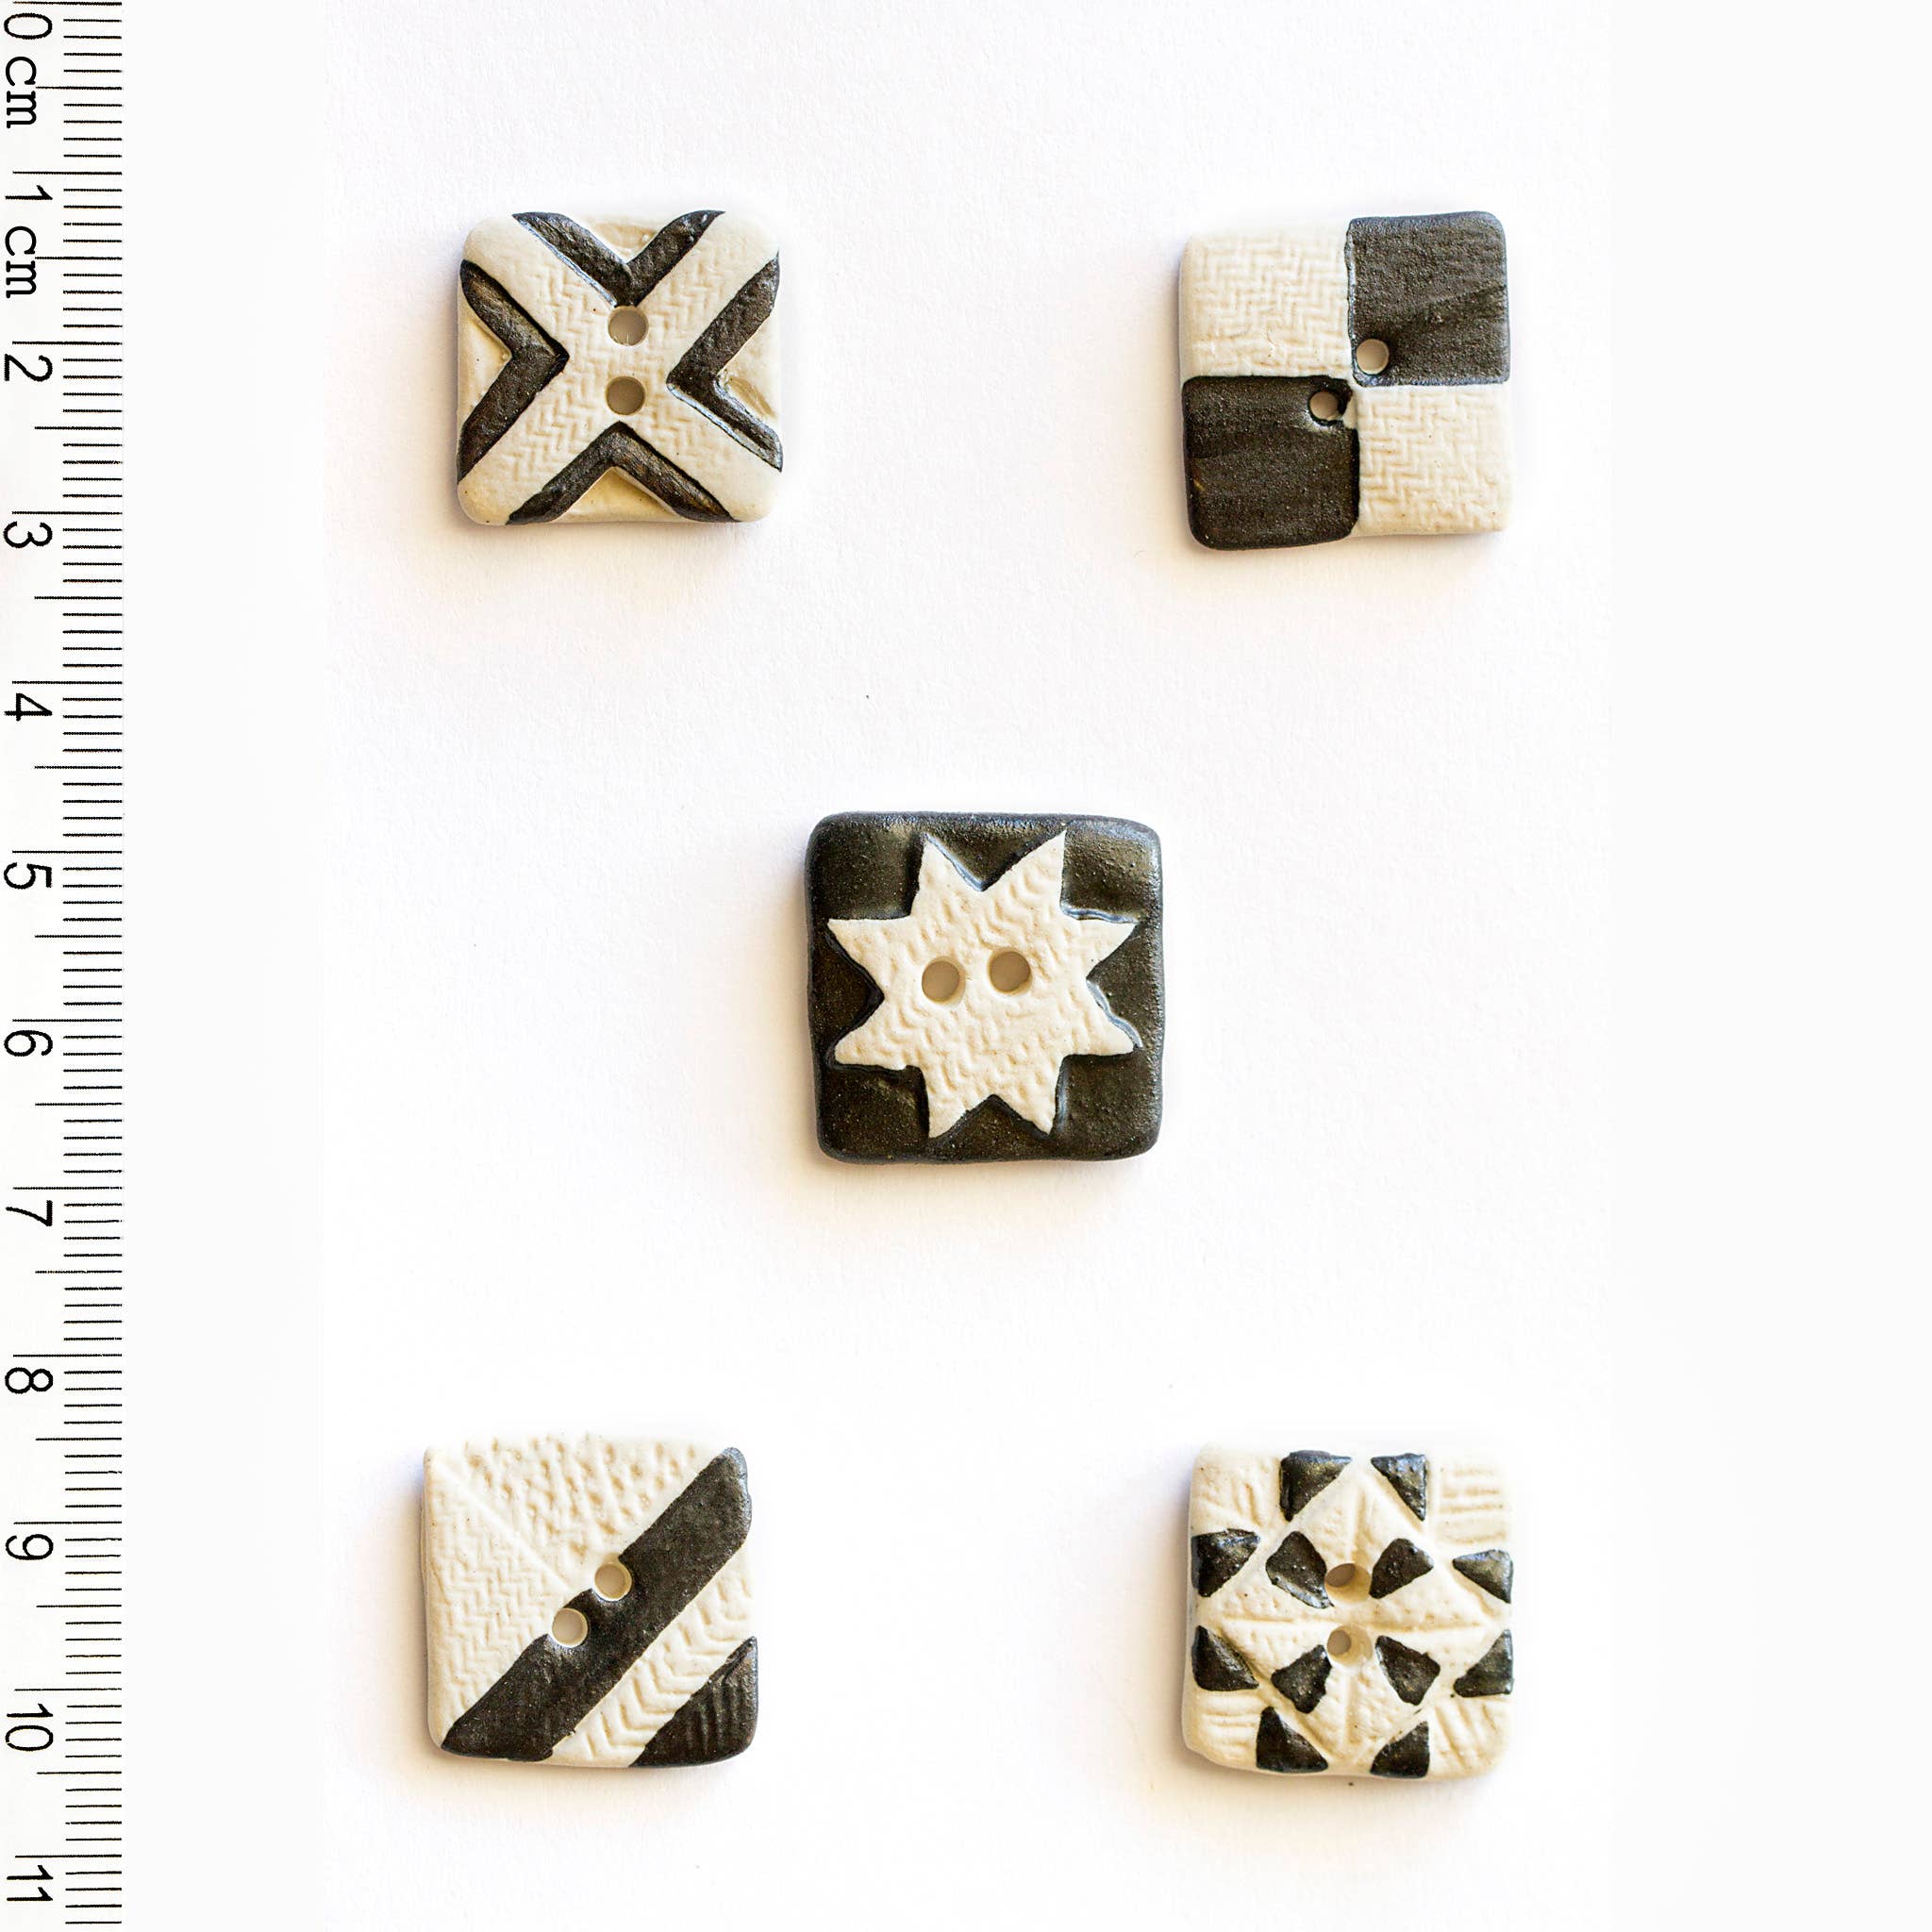 Incomparable Buttons - 5 Quilt Design Buttons